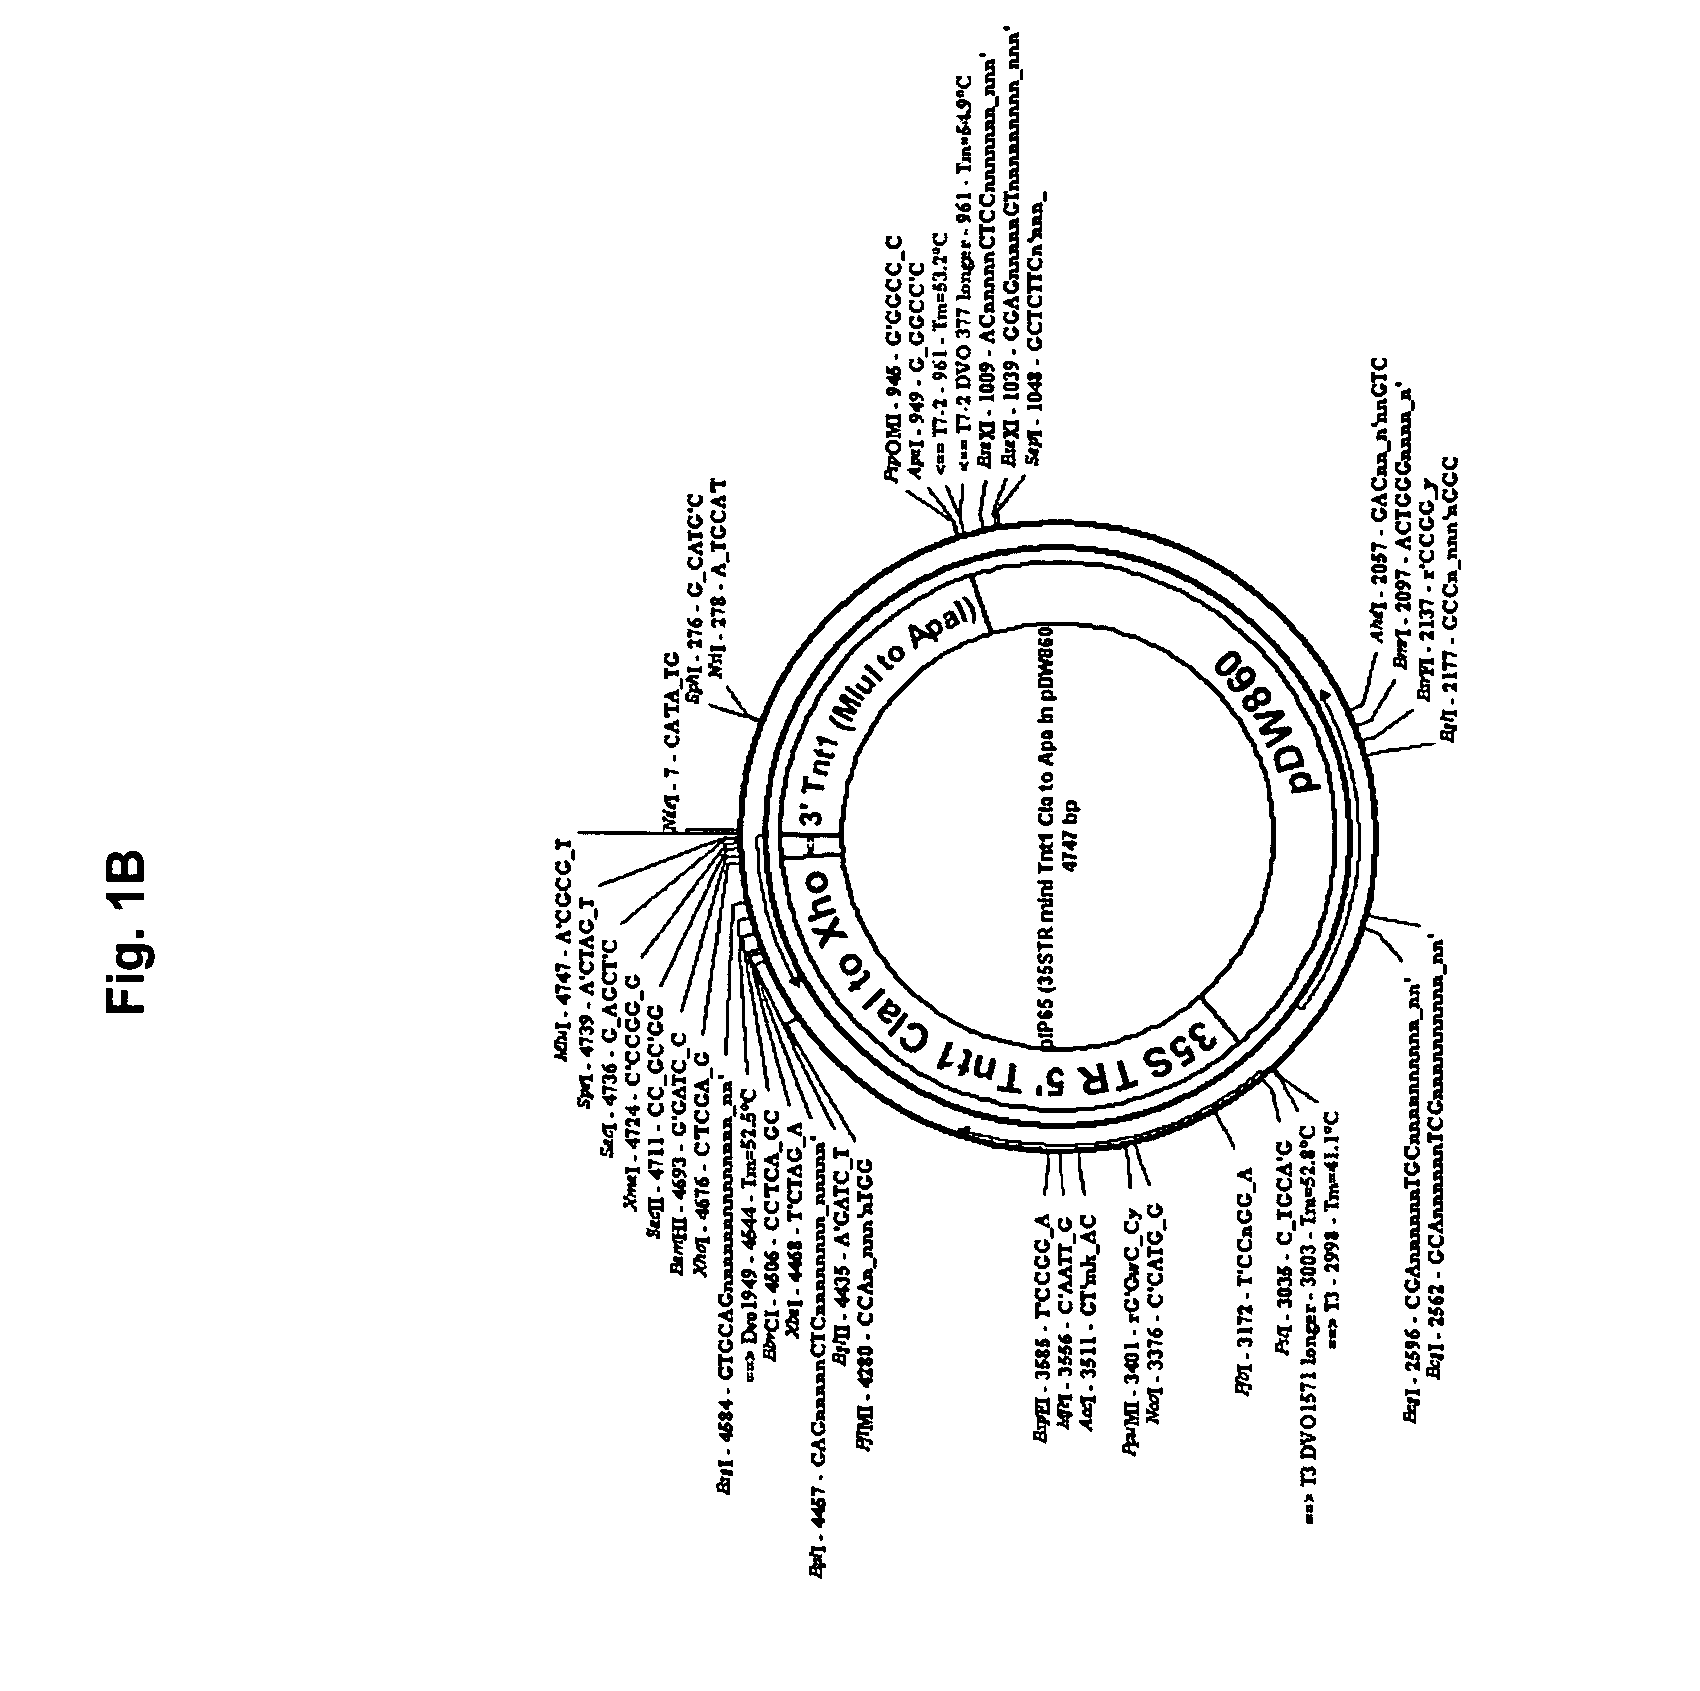 Retroelement vector system for amplification and delivery of nucleotide sequences in plants